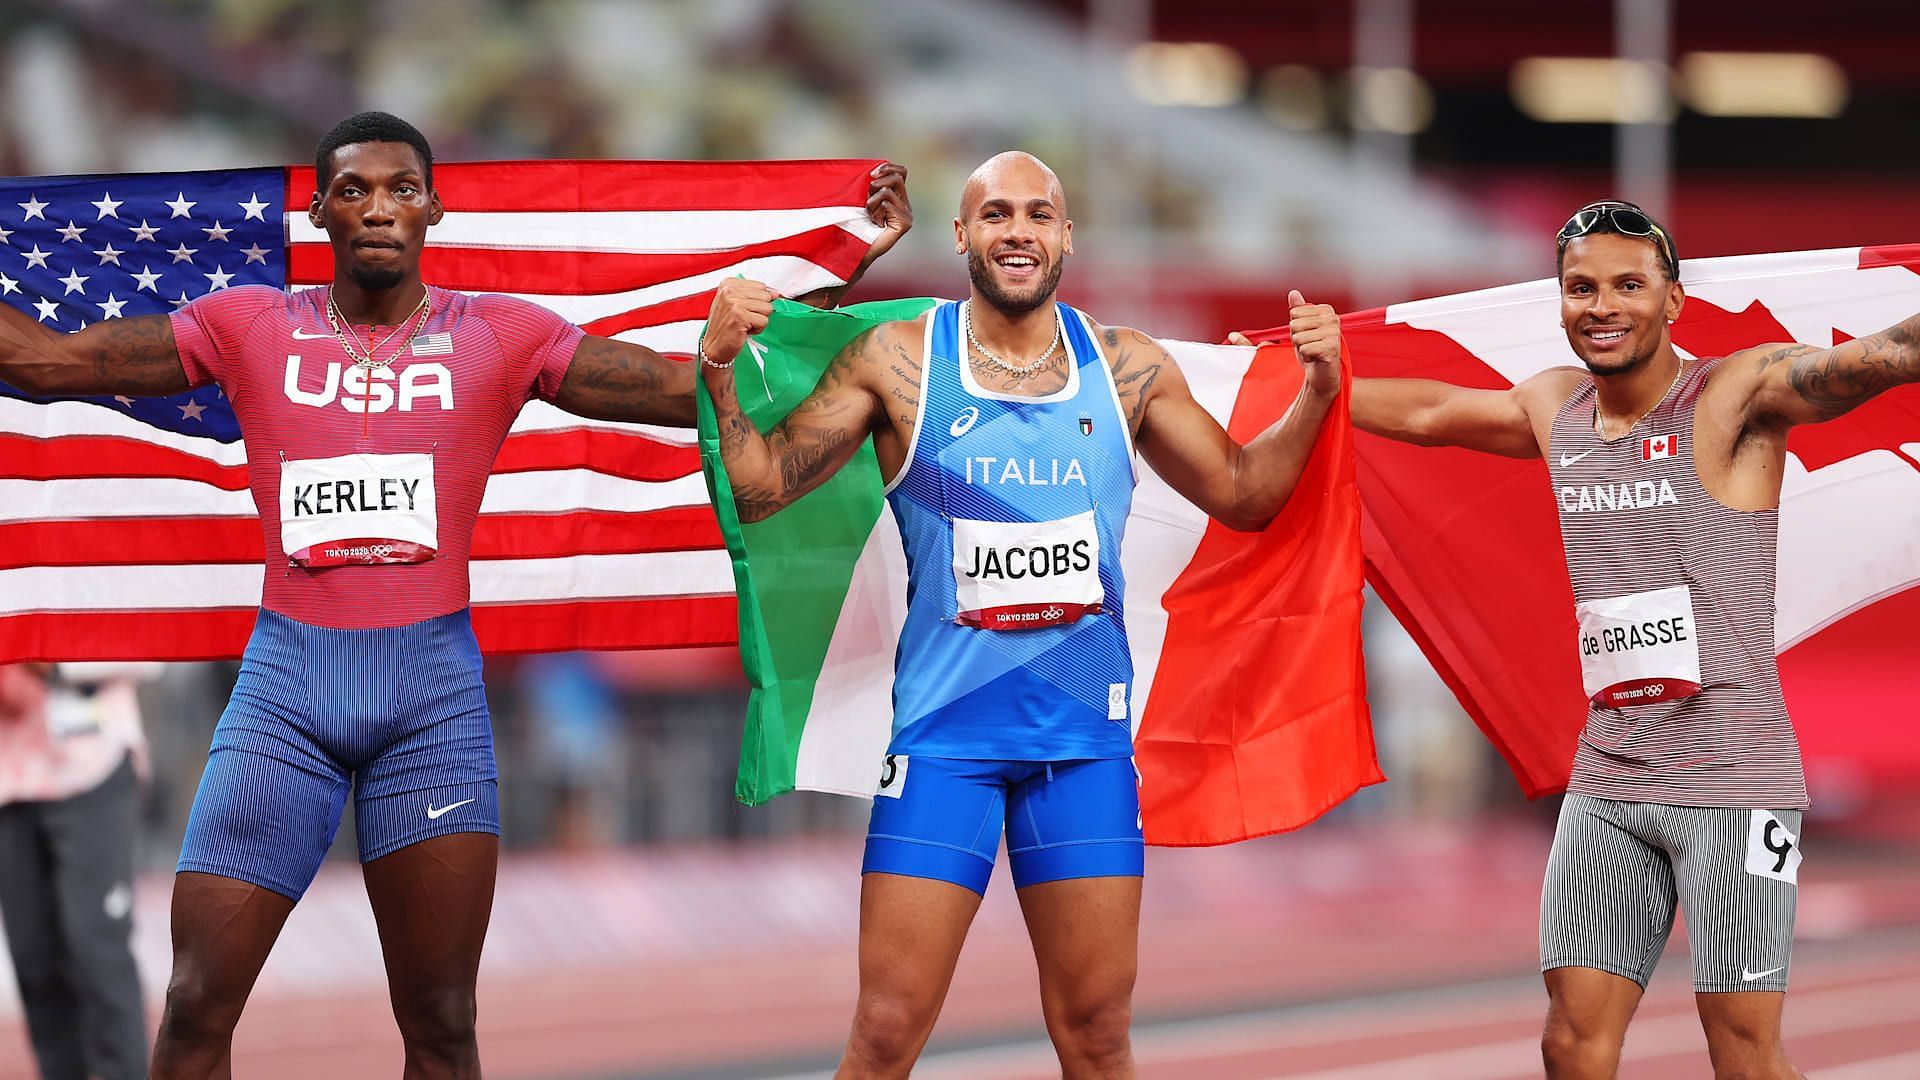 Fred Kerley, Lamont Marcell Jacobs, and Andre De Grasse (Image via Olympics)